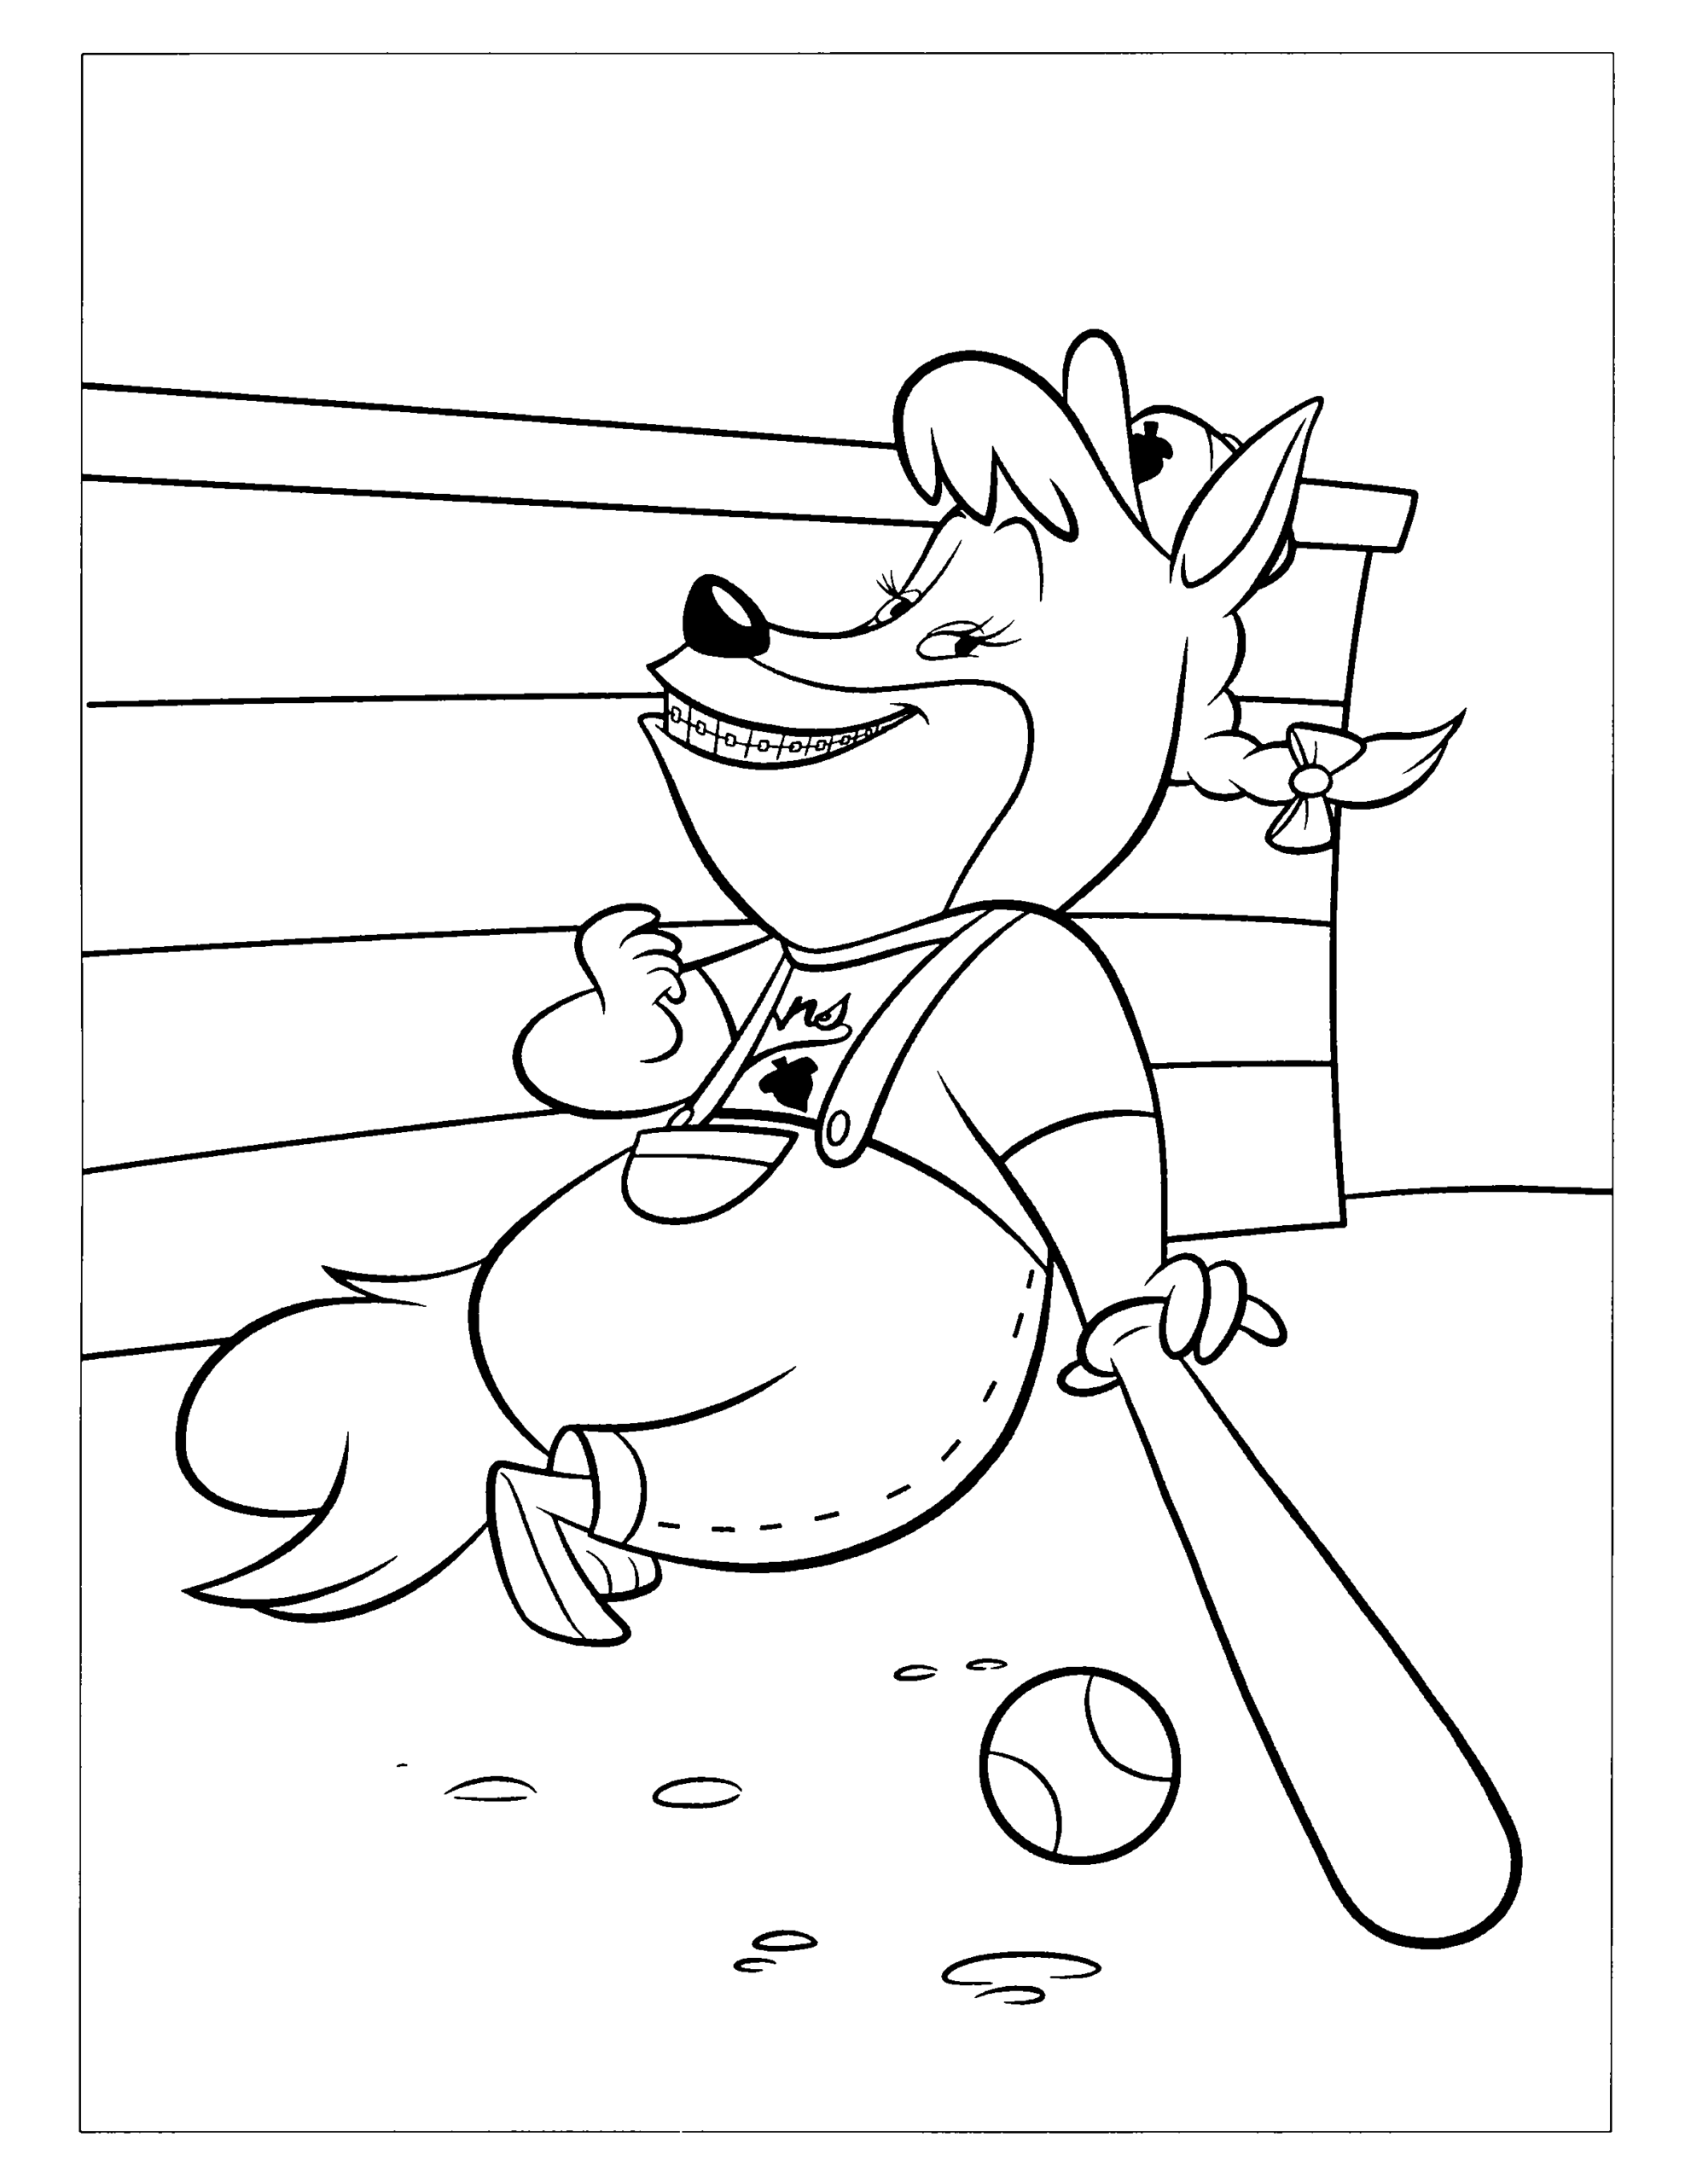 Chicken Little Coloring Pages TV Film chicken little 13 Printable 2020 02083 Coloring4free